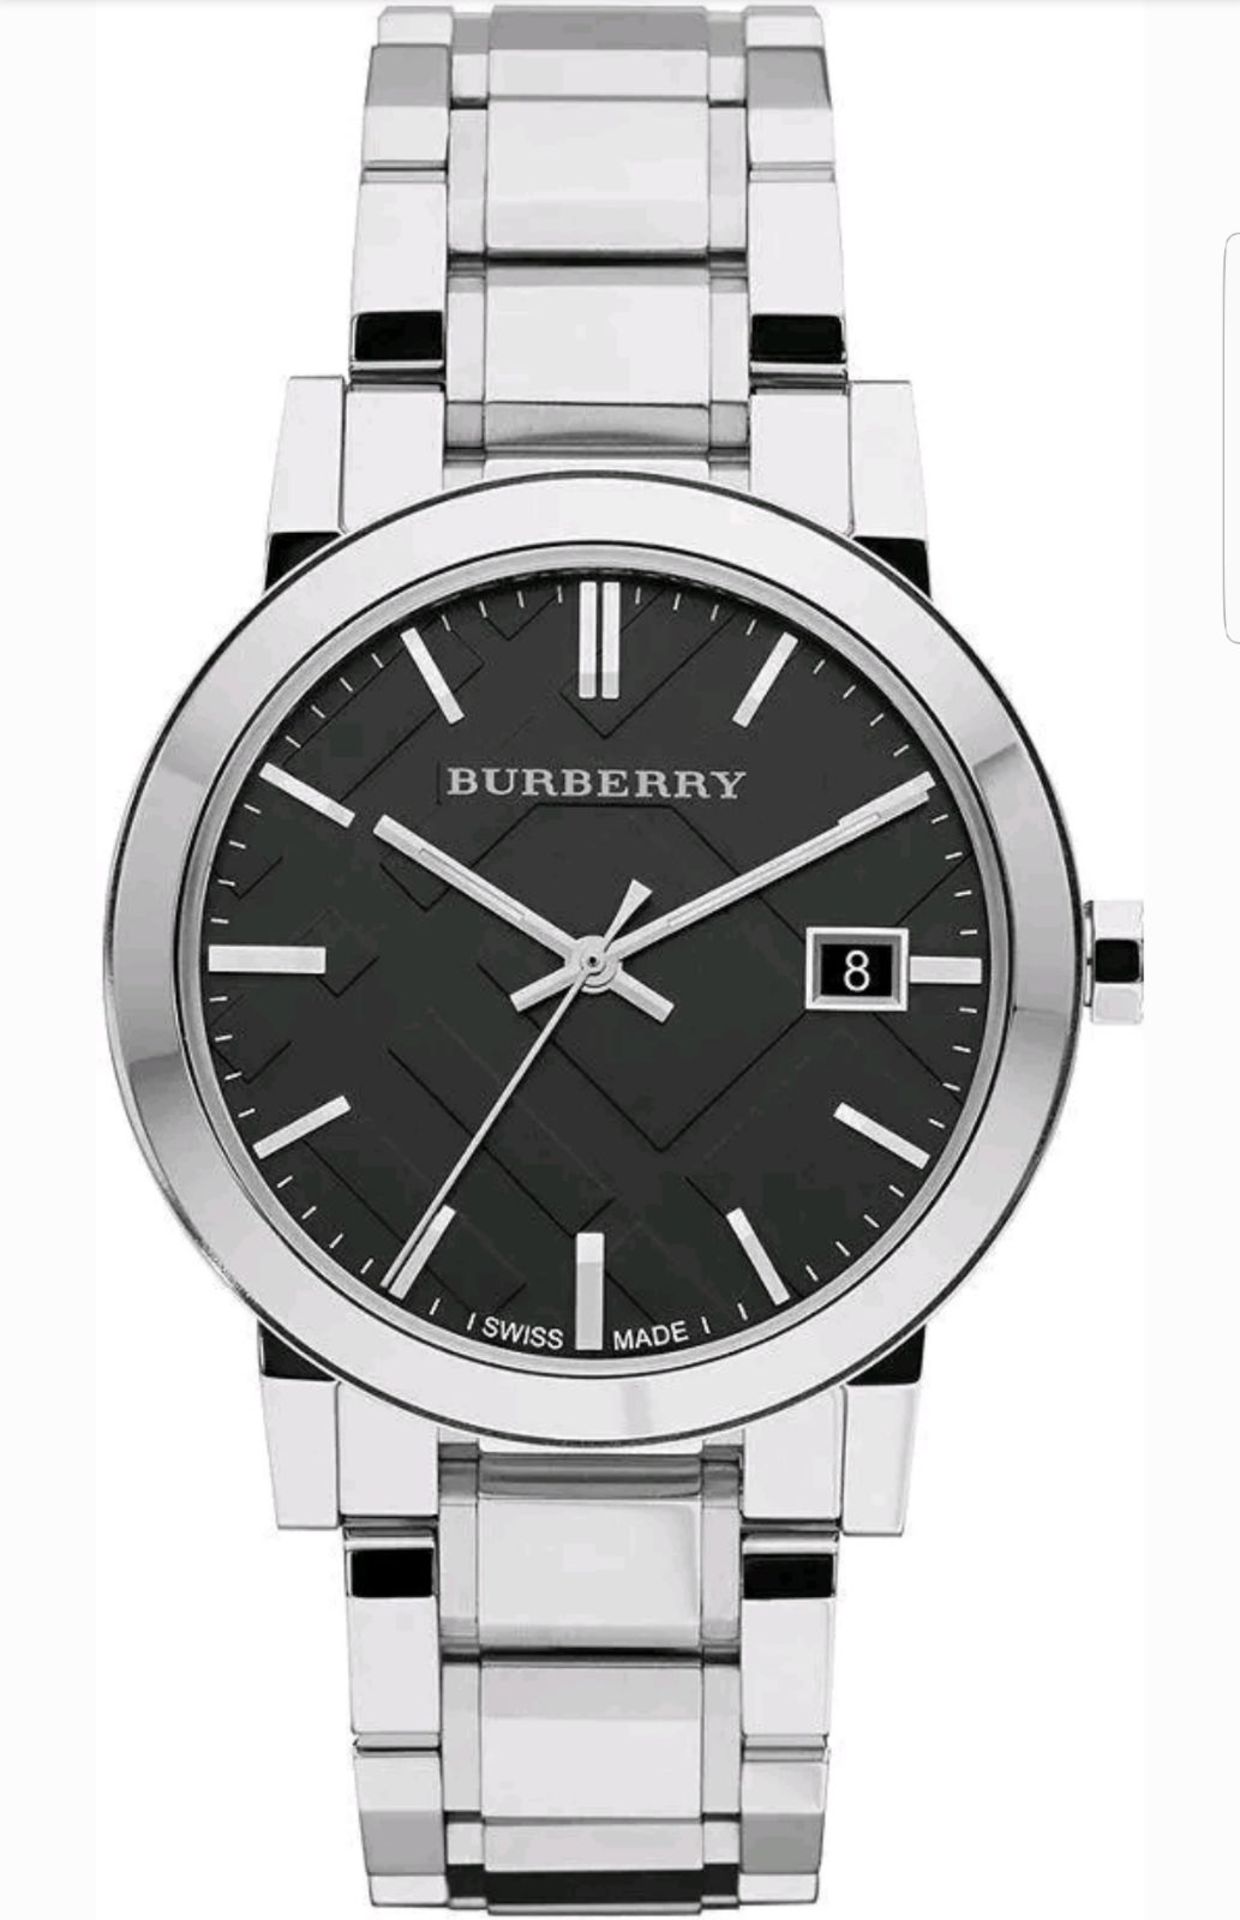 BRAND NEW GENTS BURBERRY WATCH ÊBU9001, COMPLETE WITH ORIGINAL PACKAGING AND MANUAL